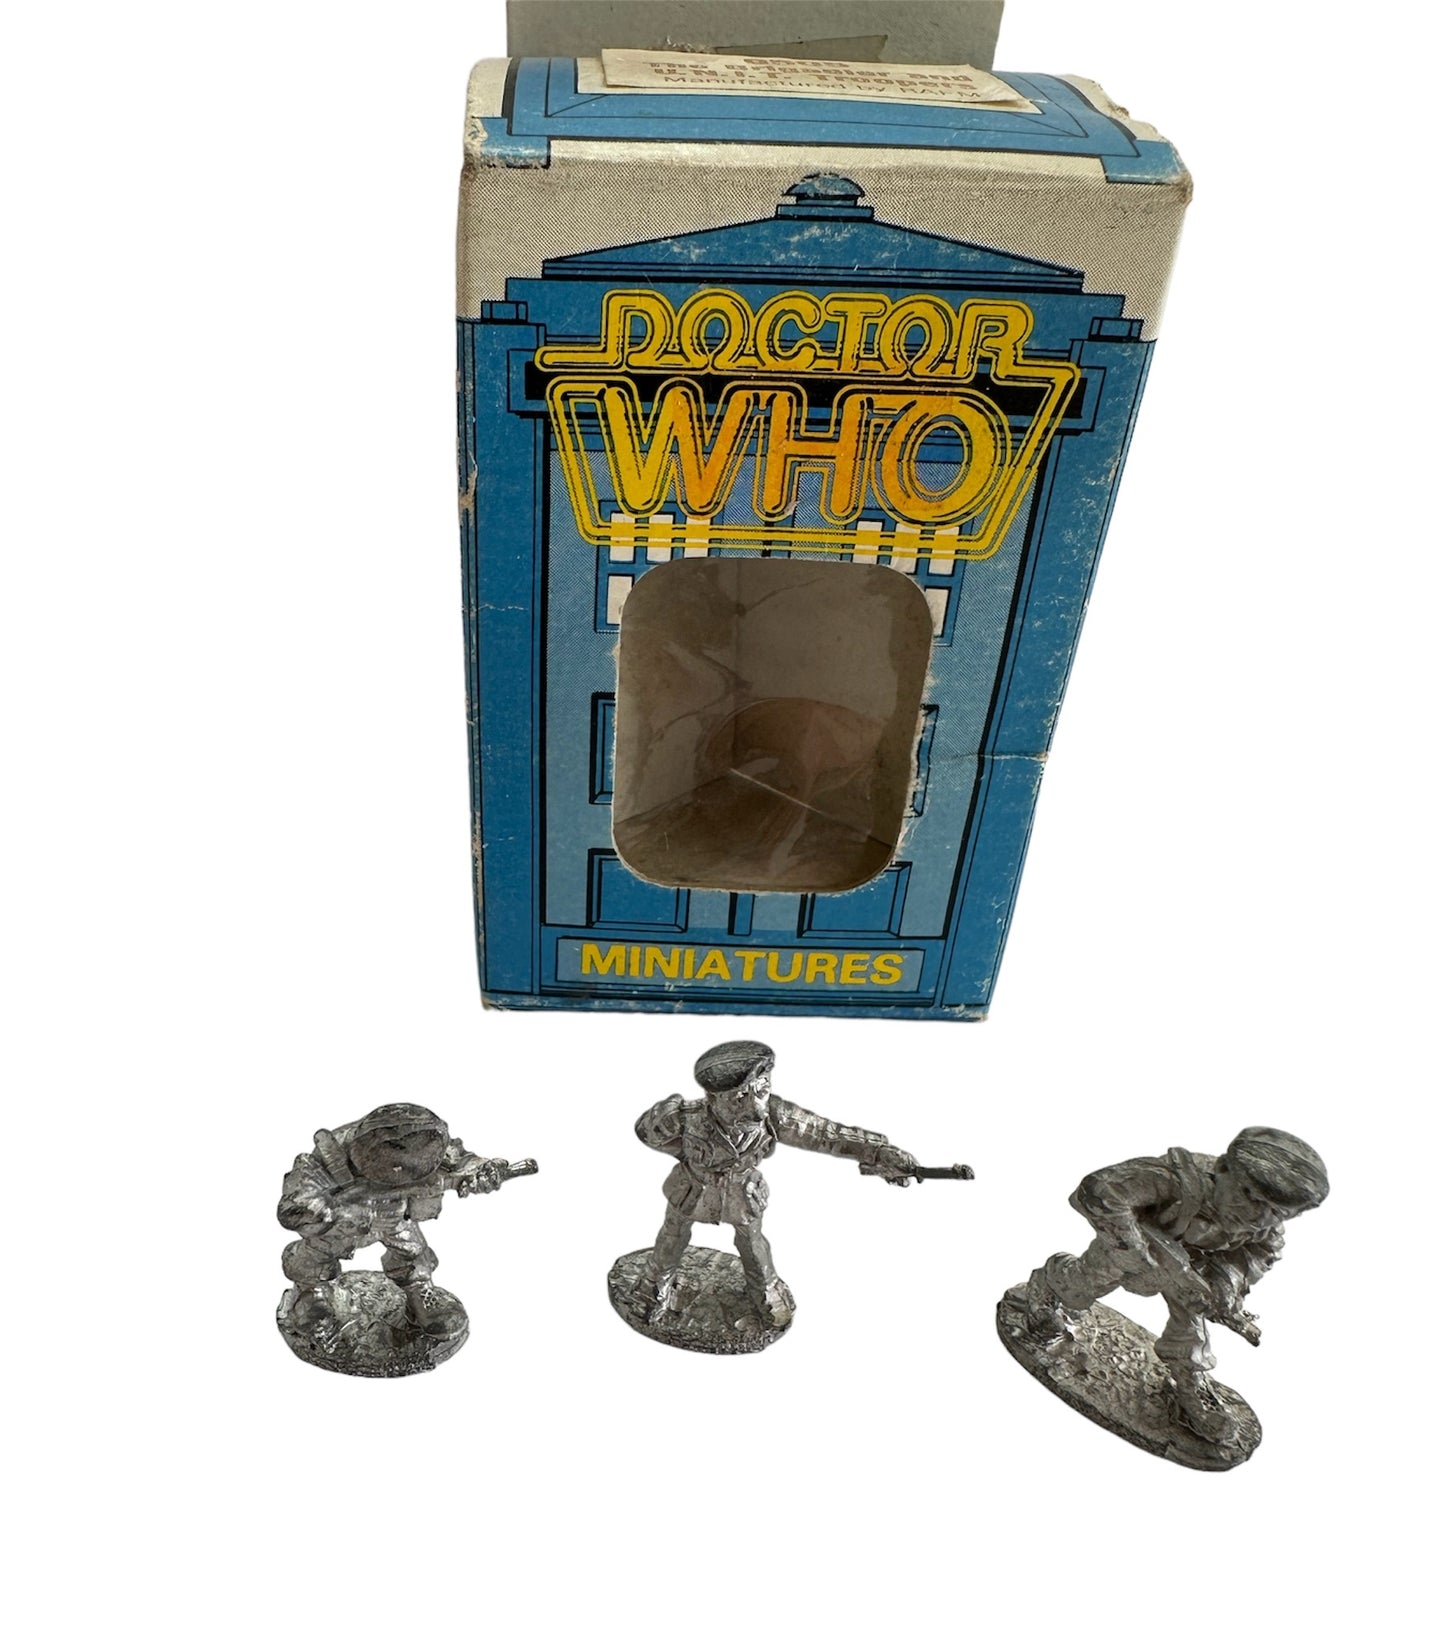 Vintage FASA Corp 1986 Doctor Dr Who Citadel Miniatures Metal Figures No. 9505 - The Brigadier And UNIT Troopers - Set Of 3 Figures - In The Original Box - Shop Stock Room Find